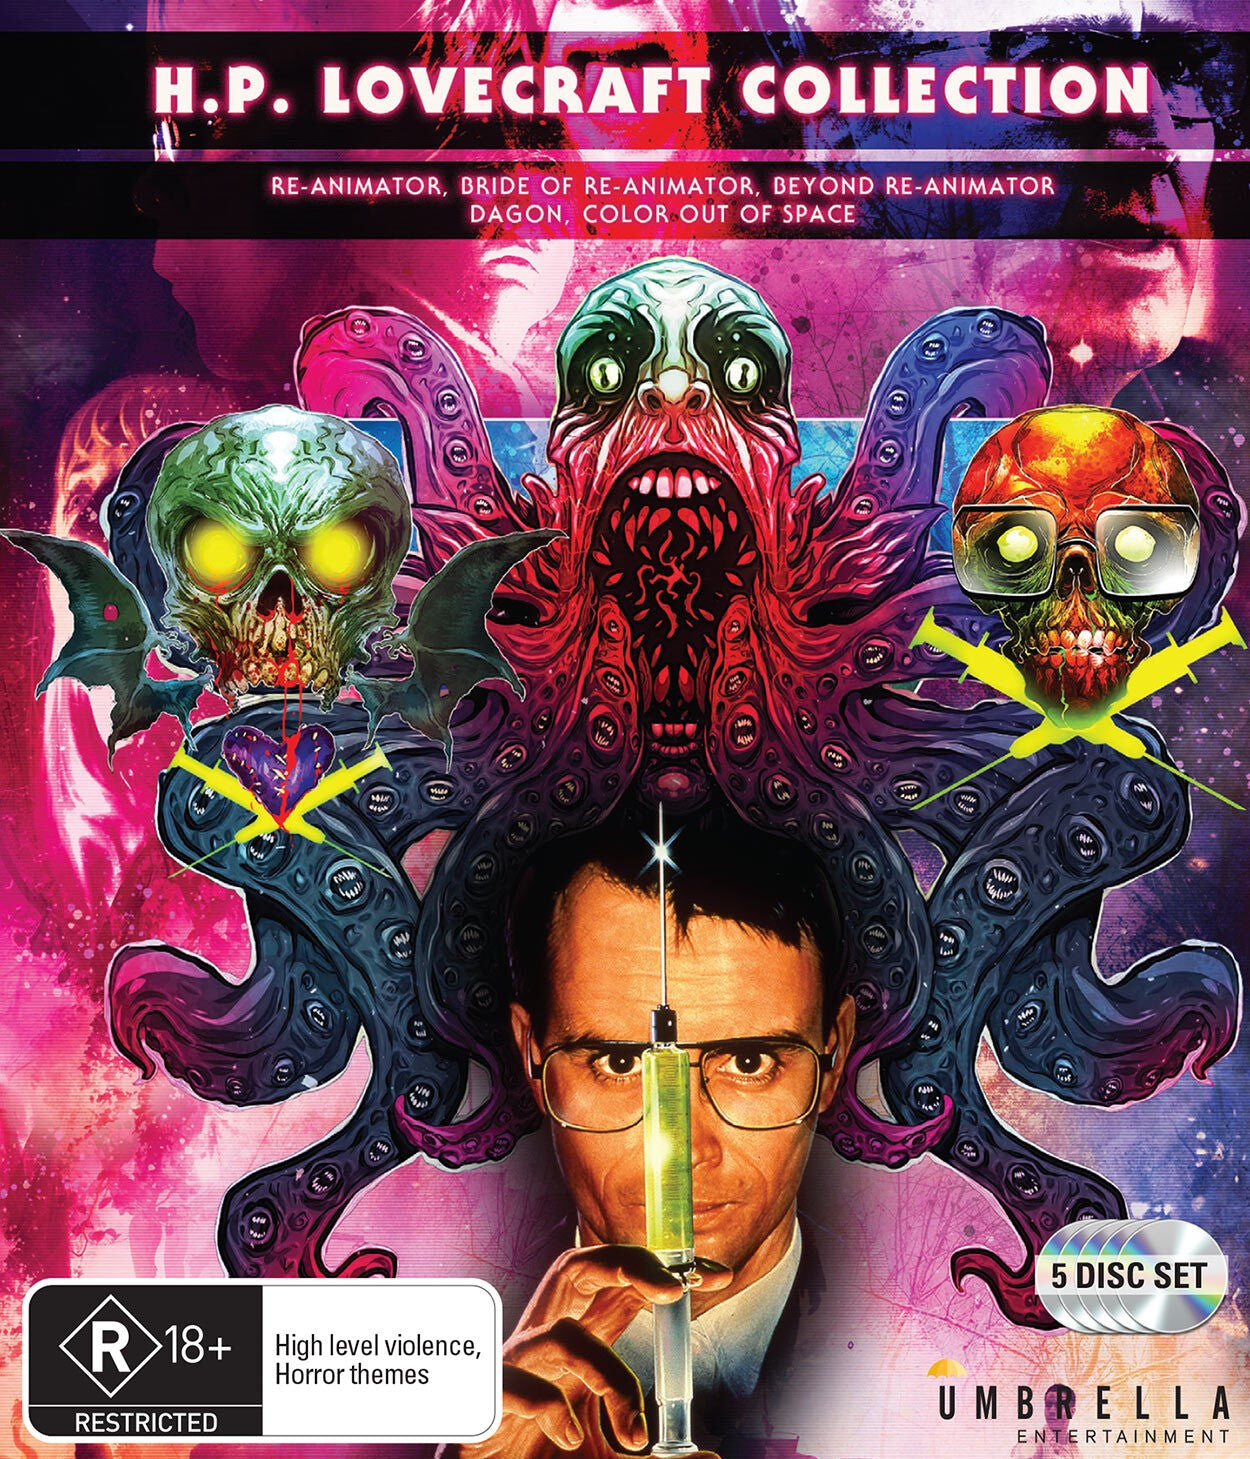 THE HP LOVECRAFT COLLECTION (REGION FREE IMPORT) BLU-RAY